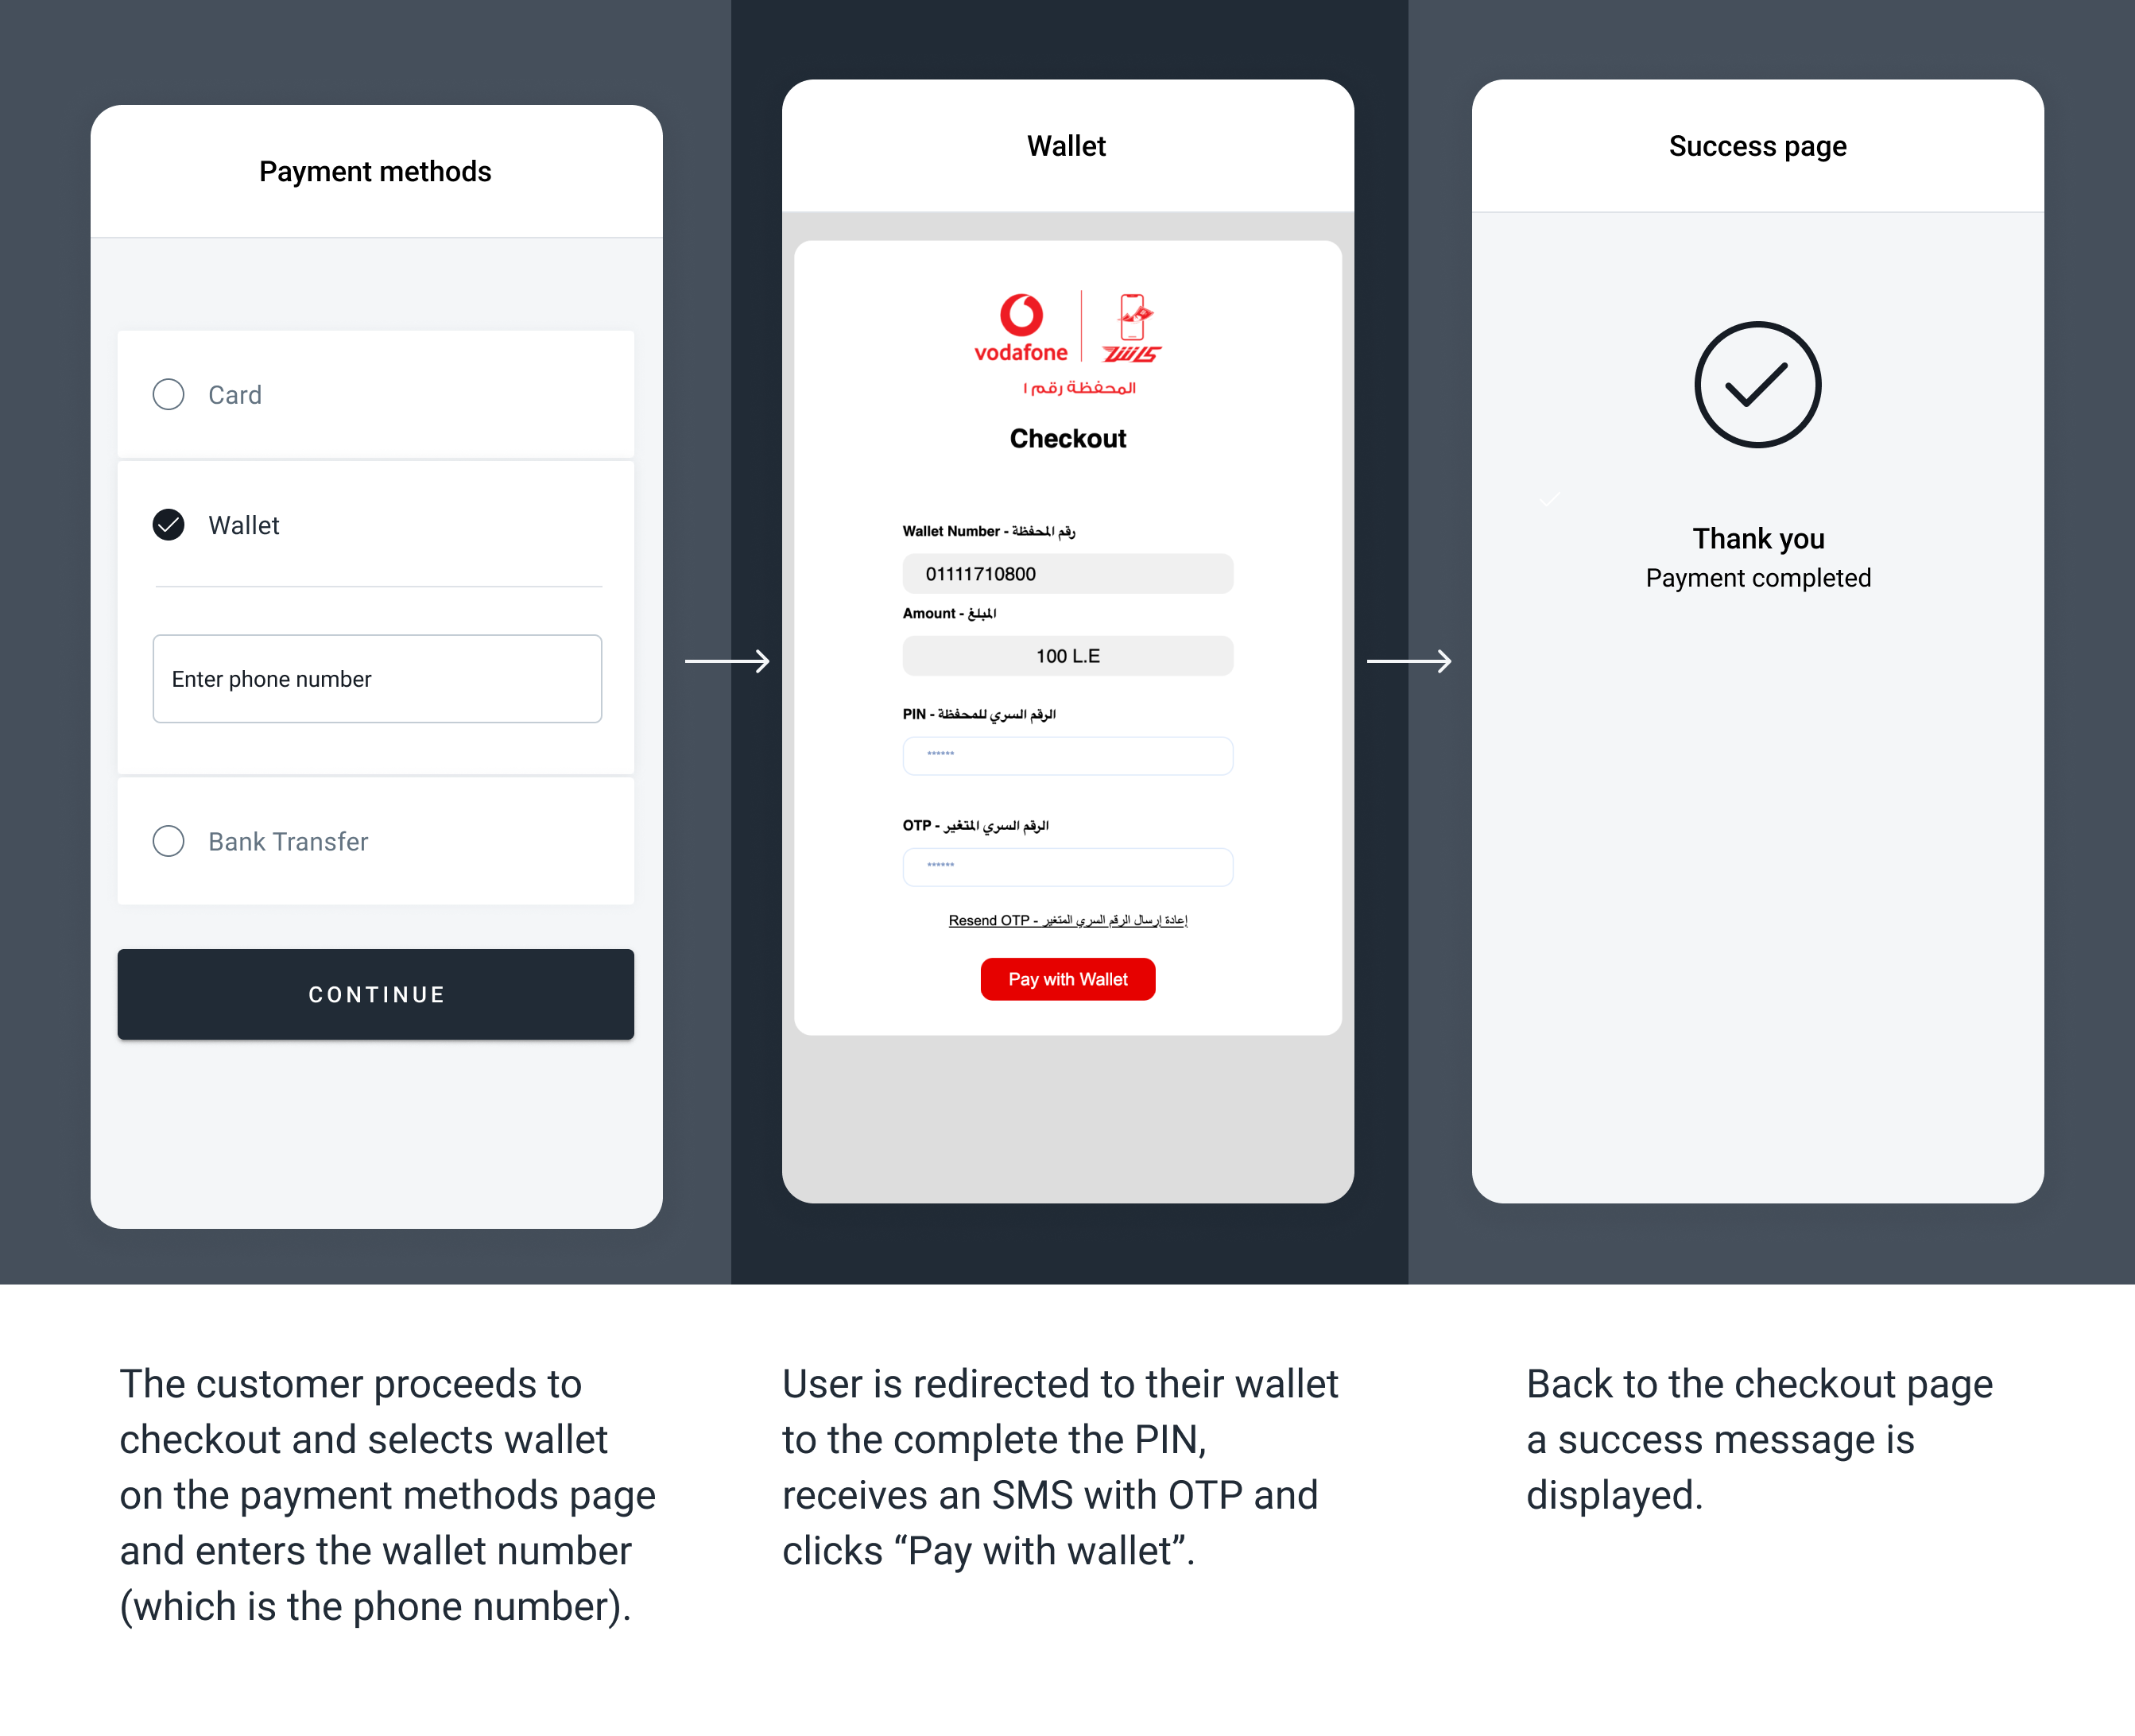 The screenshots illustrate a generic Wallet redirect flow. The specifics of the flow can change depending on the payment method selected to complete the transaction.